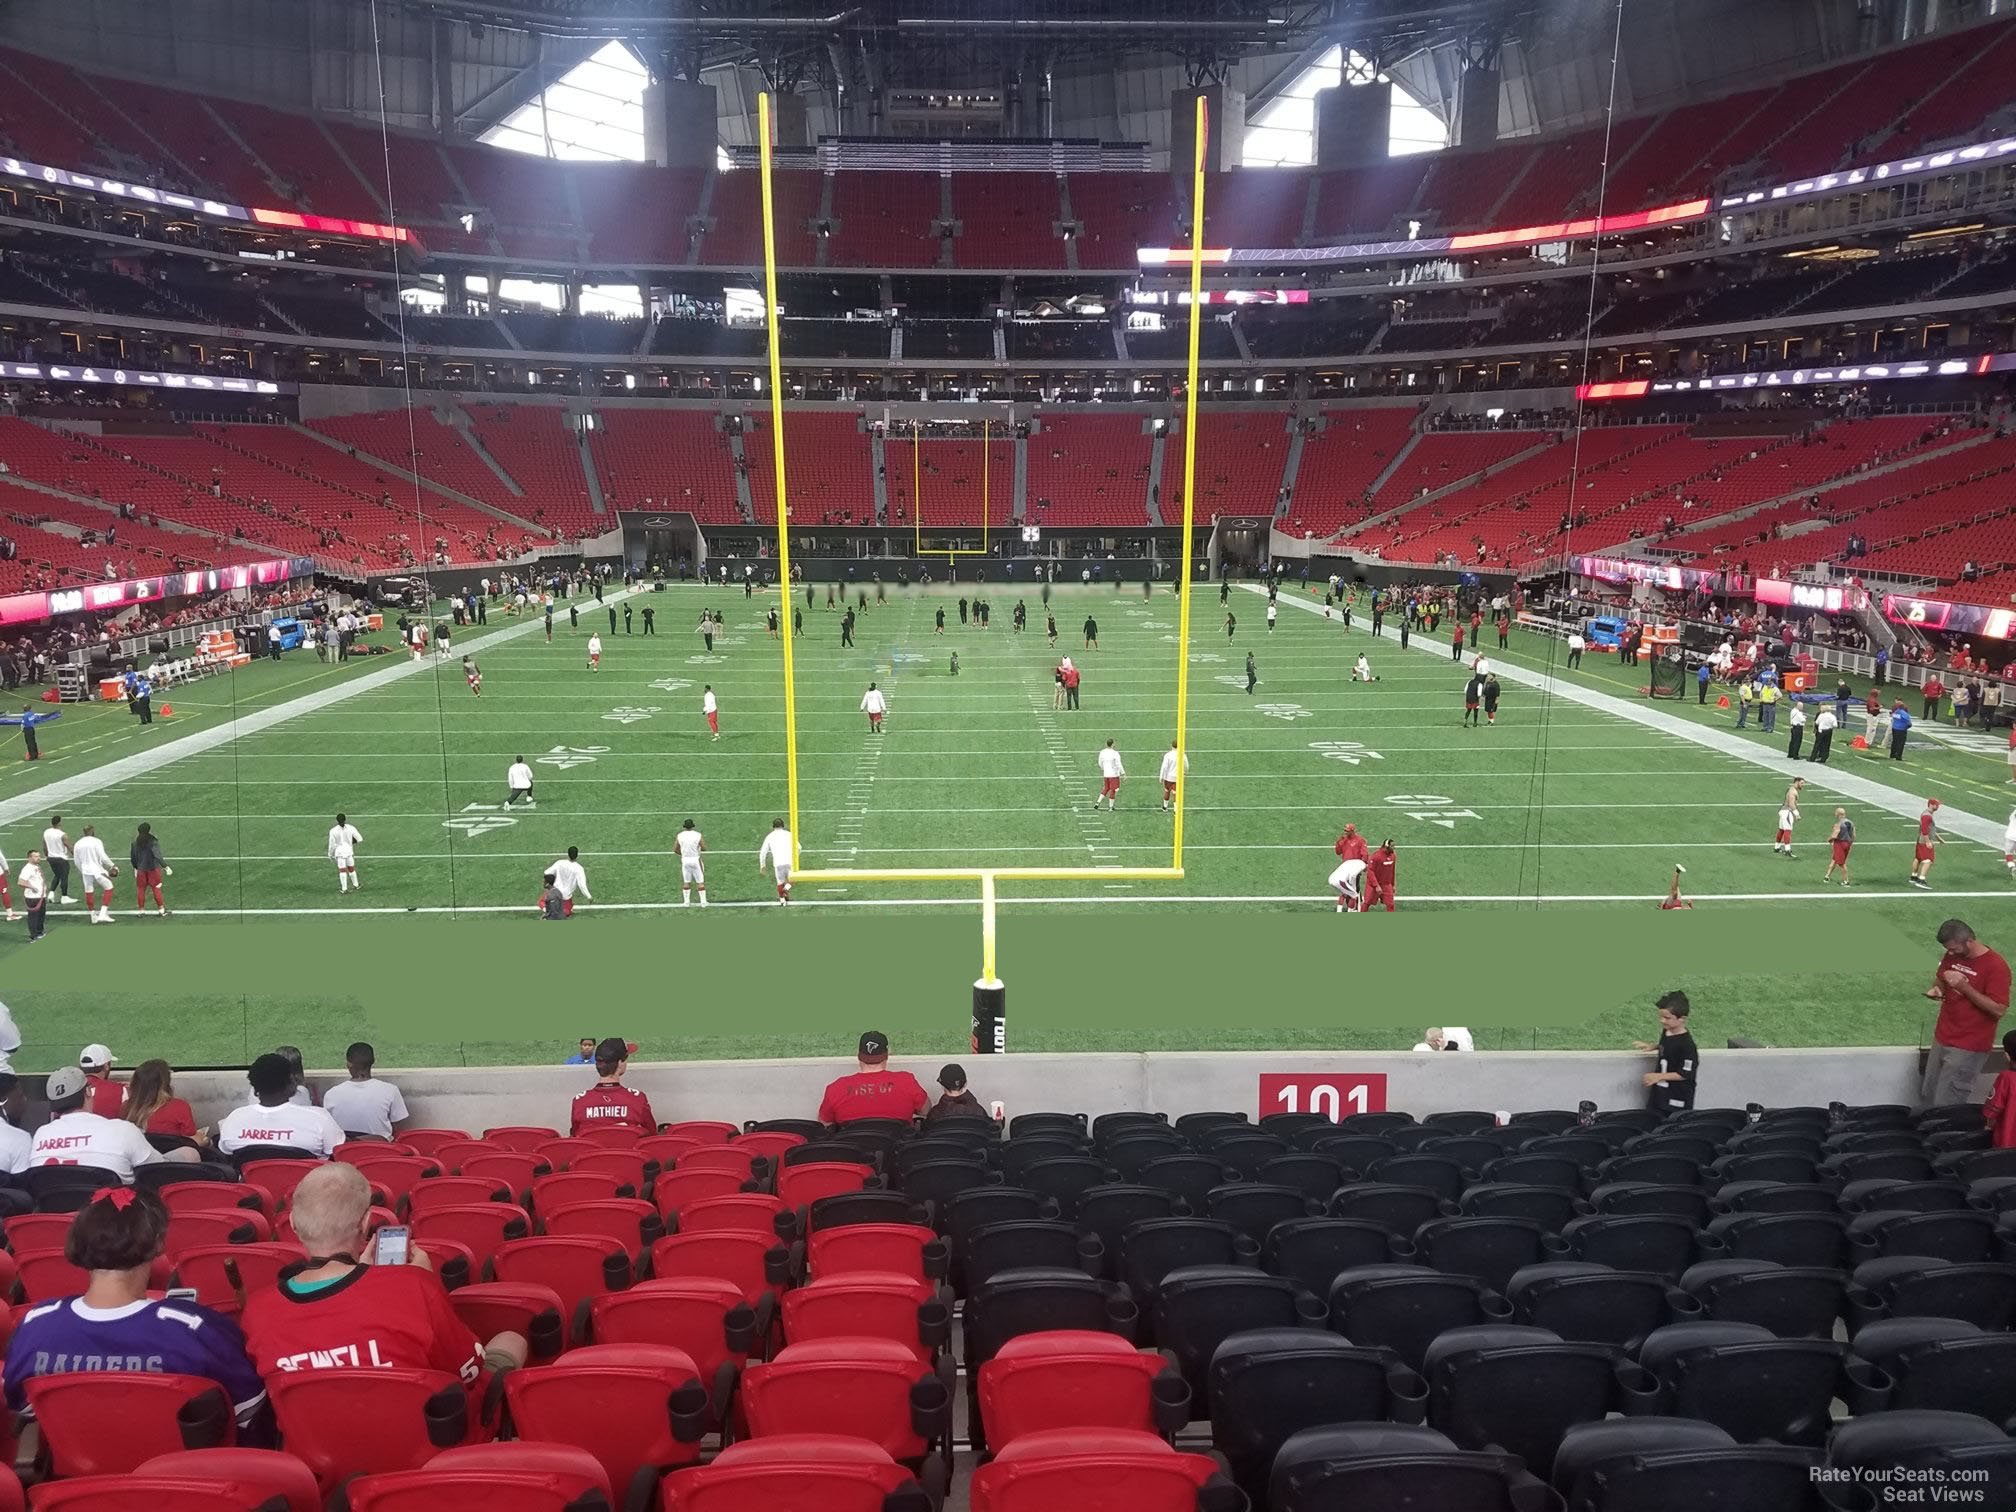 section 101, row 25 seat view  for football - mercedes-benz stadium